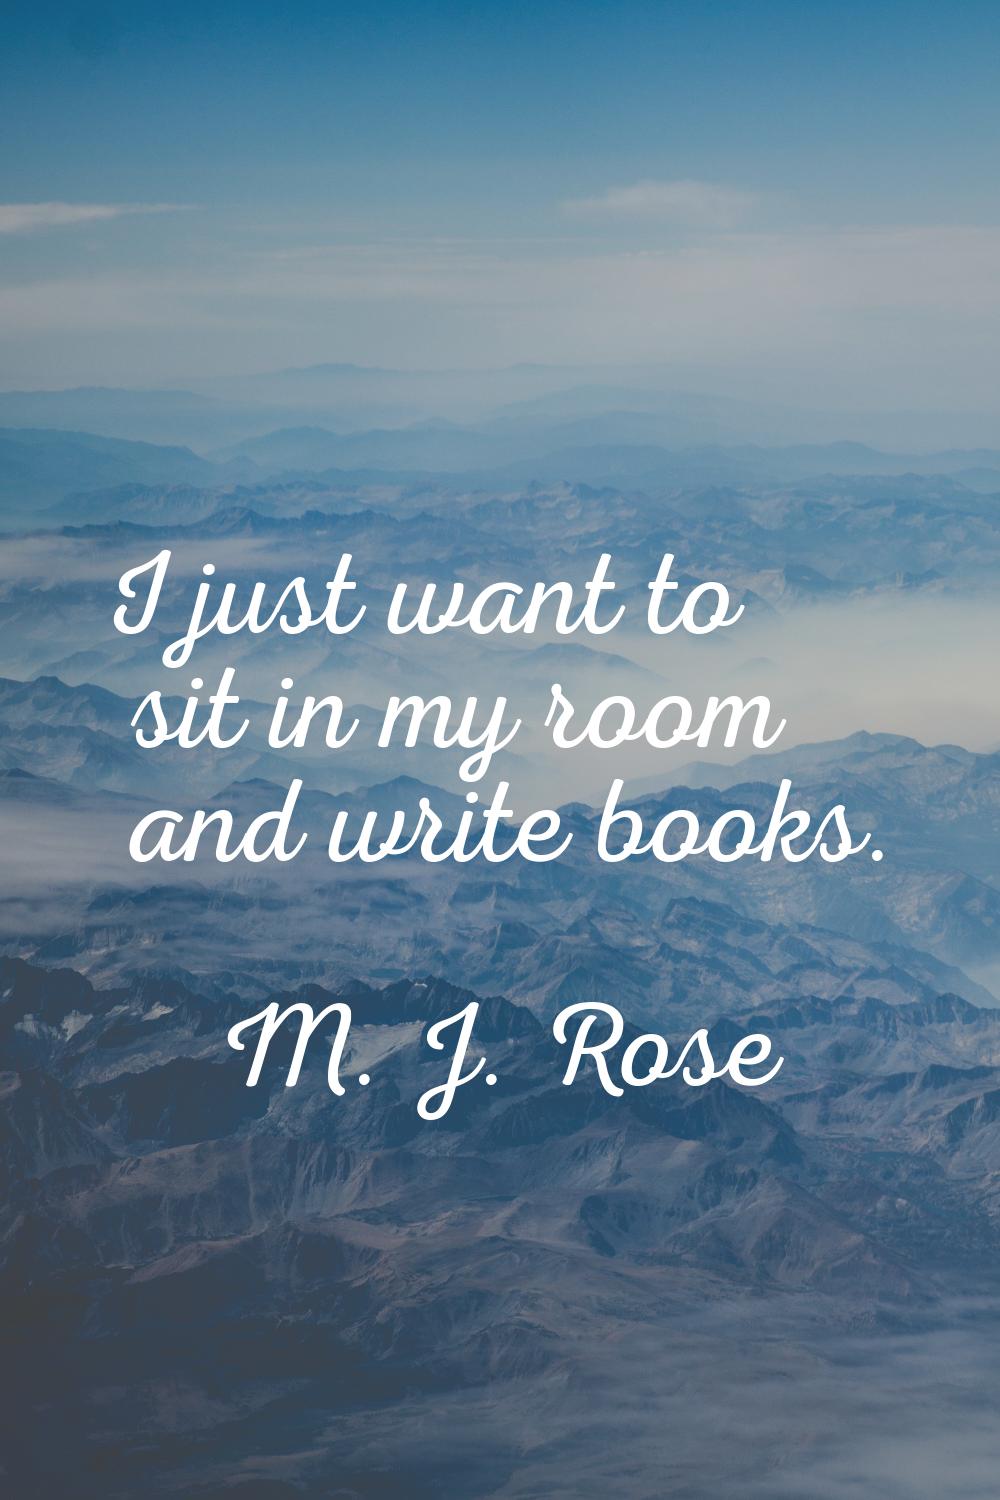 I just want to sit in my room and write books.